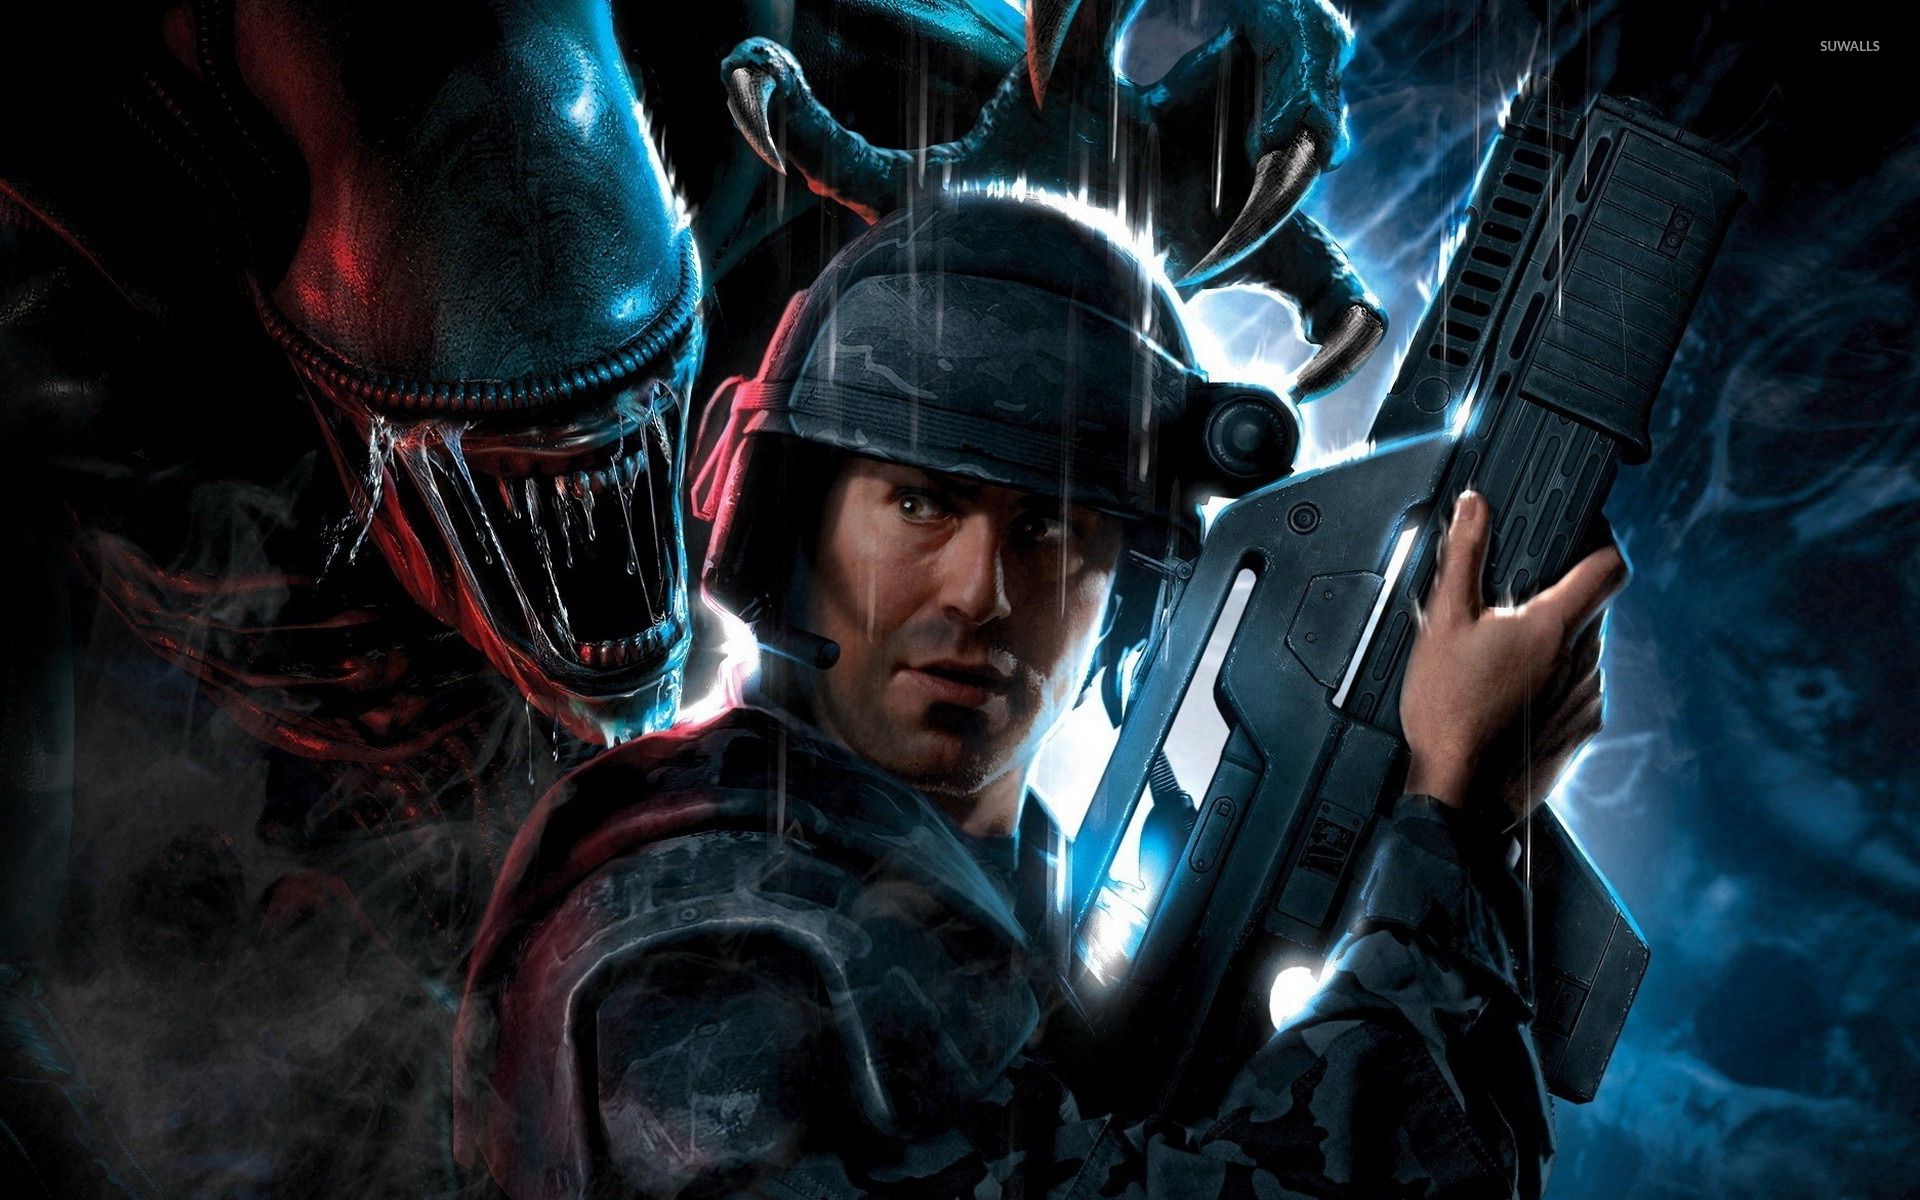 Free download Aliens Colonial Marines wallpaper Game wallpaper 16842 [1280x800] for your Desktop, Mobile & Tablet. Explore Aliens Colonial Marines Wallpaper. Marines Wallpaper HD, Alien Queen Wallpaper